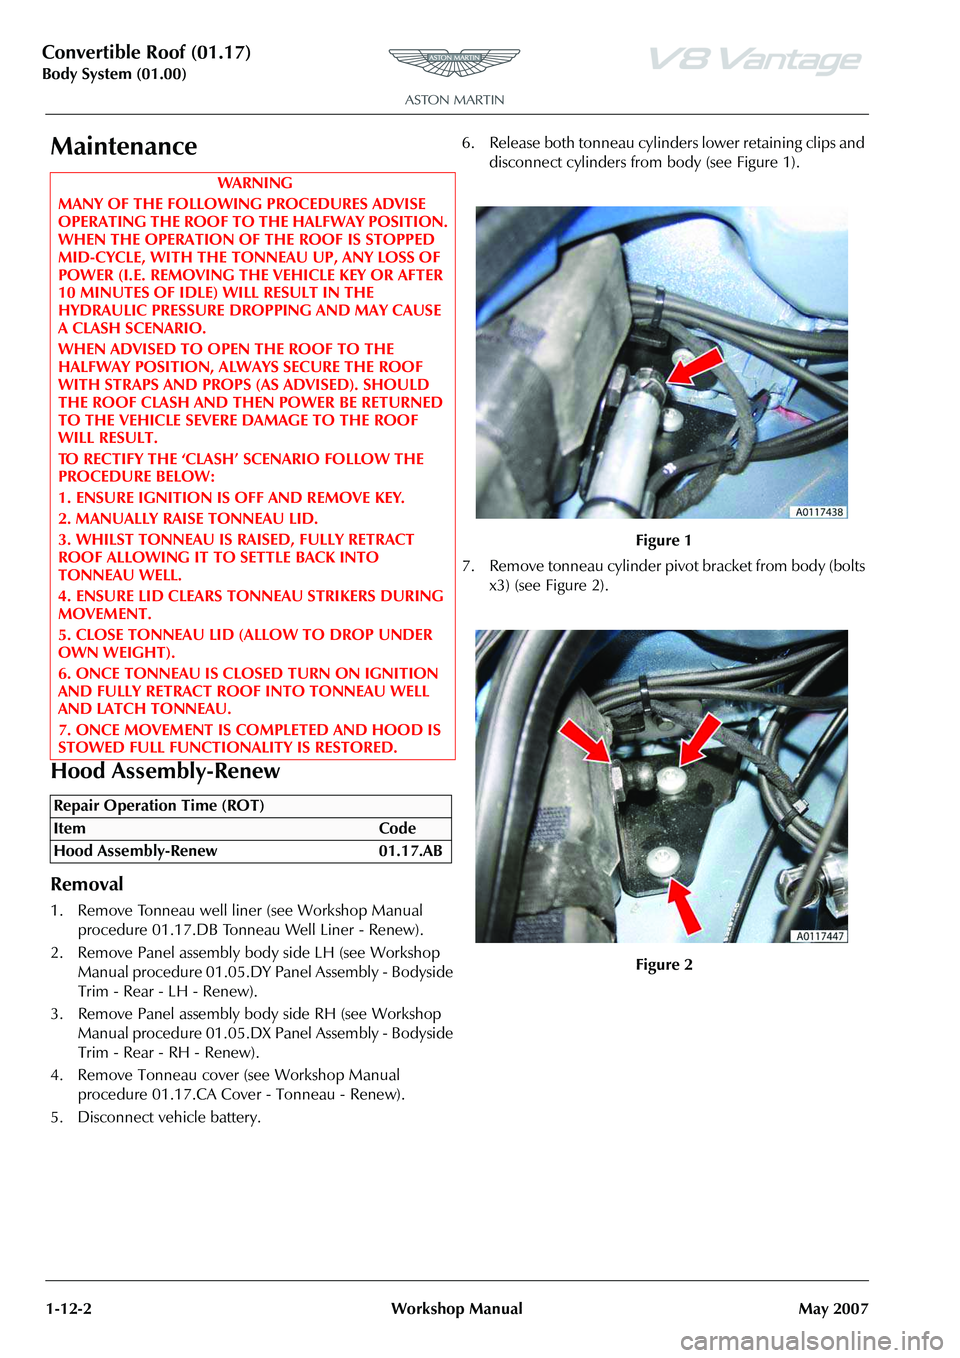 ASTON MARTIN V8 VANTAGE 2010  Workshop Manual Convertible Roof (01.17)
Body System (01.00)1-12-2 Workshop Manual May 2007
Maintenance
Hood Assembly-Renew
Removal
1. Remove Tonneau well liner (see Workshop Manual  procedure 01.17.DB Tonneau Well L